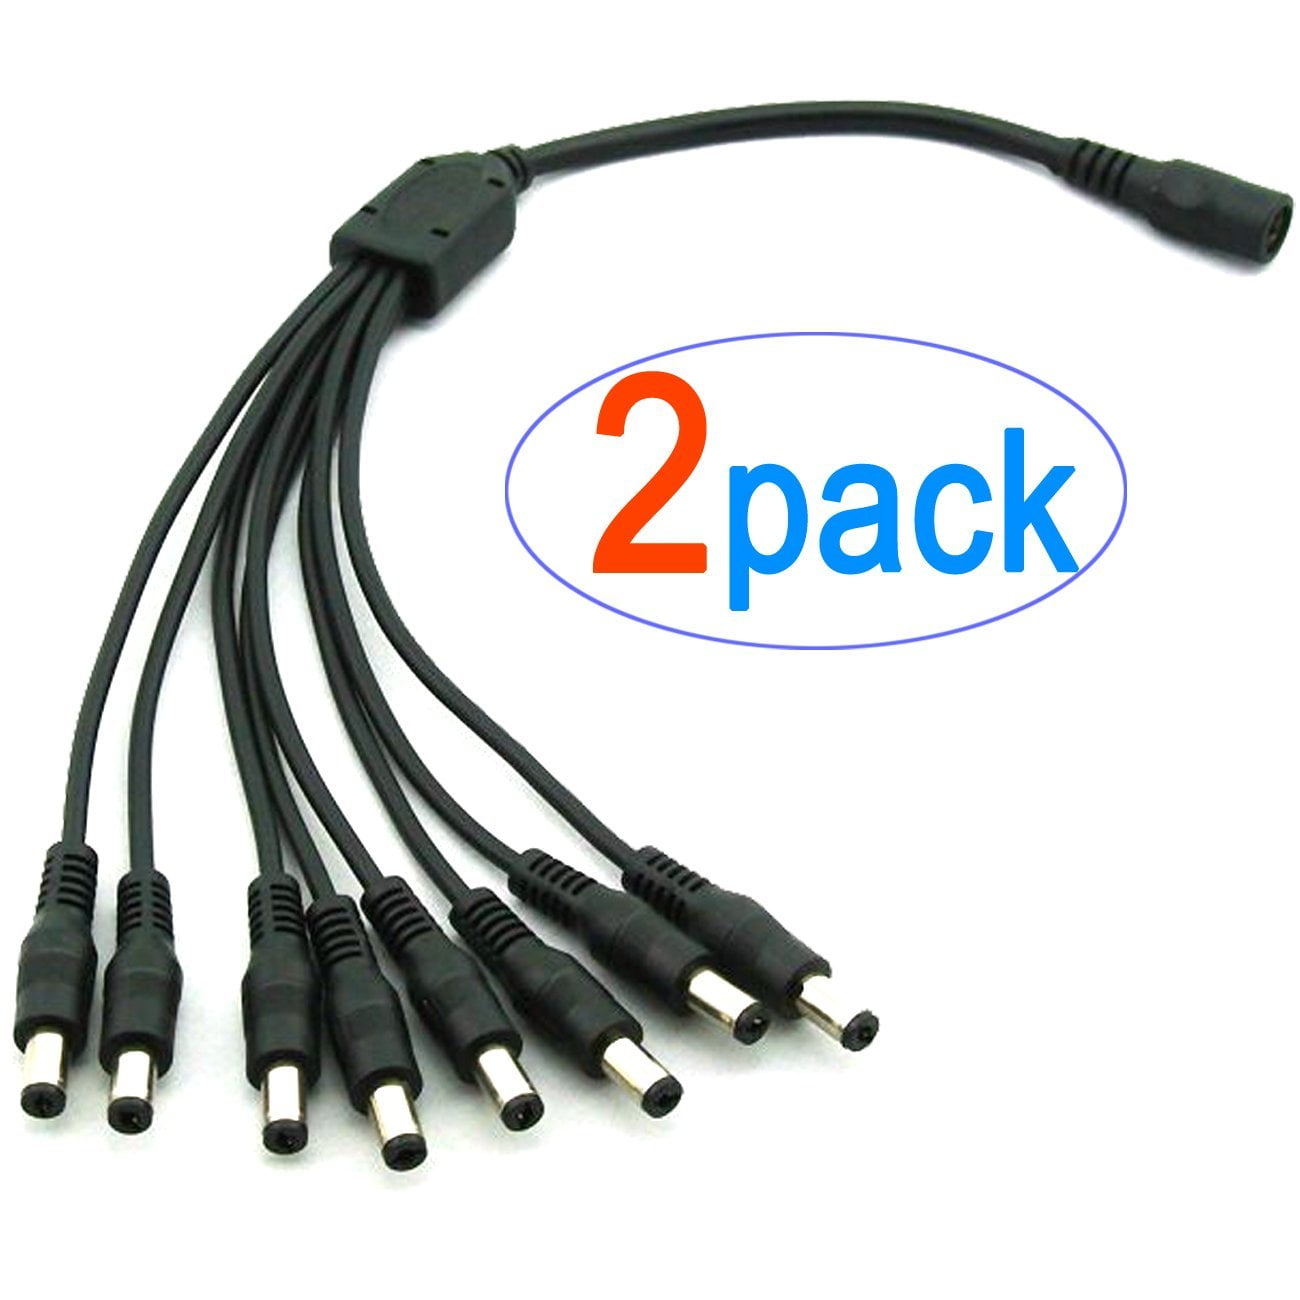 DC Power Cord Splitter Cable 1 to 2/3/4/6/8 Way For CCTV Camera LED Strip Light 